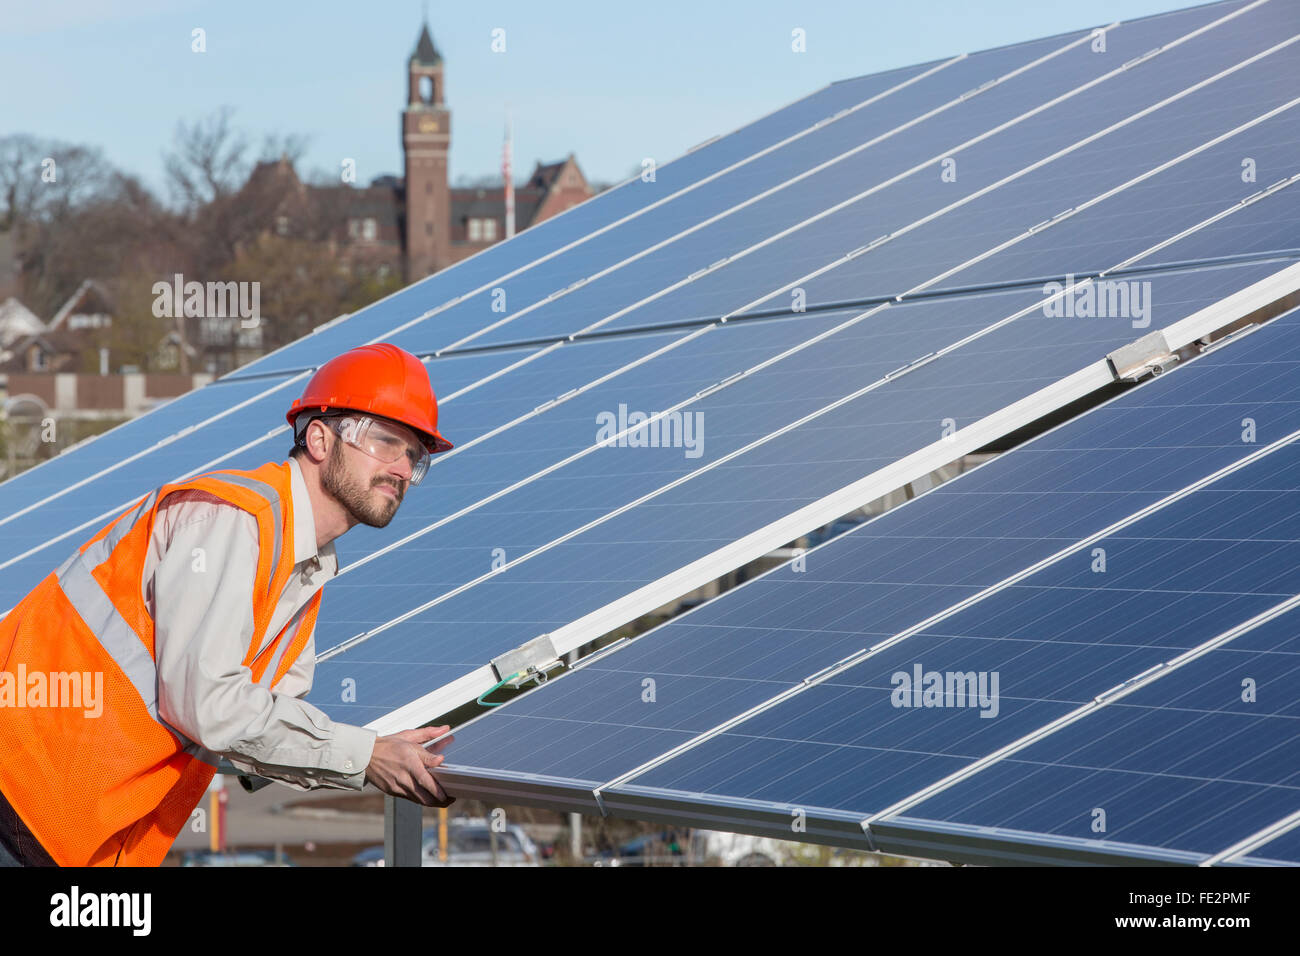 Power engineer at solar photovoltaic array examining surface of panels Stock Photo